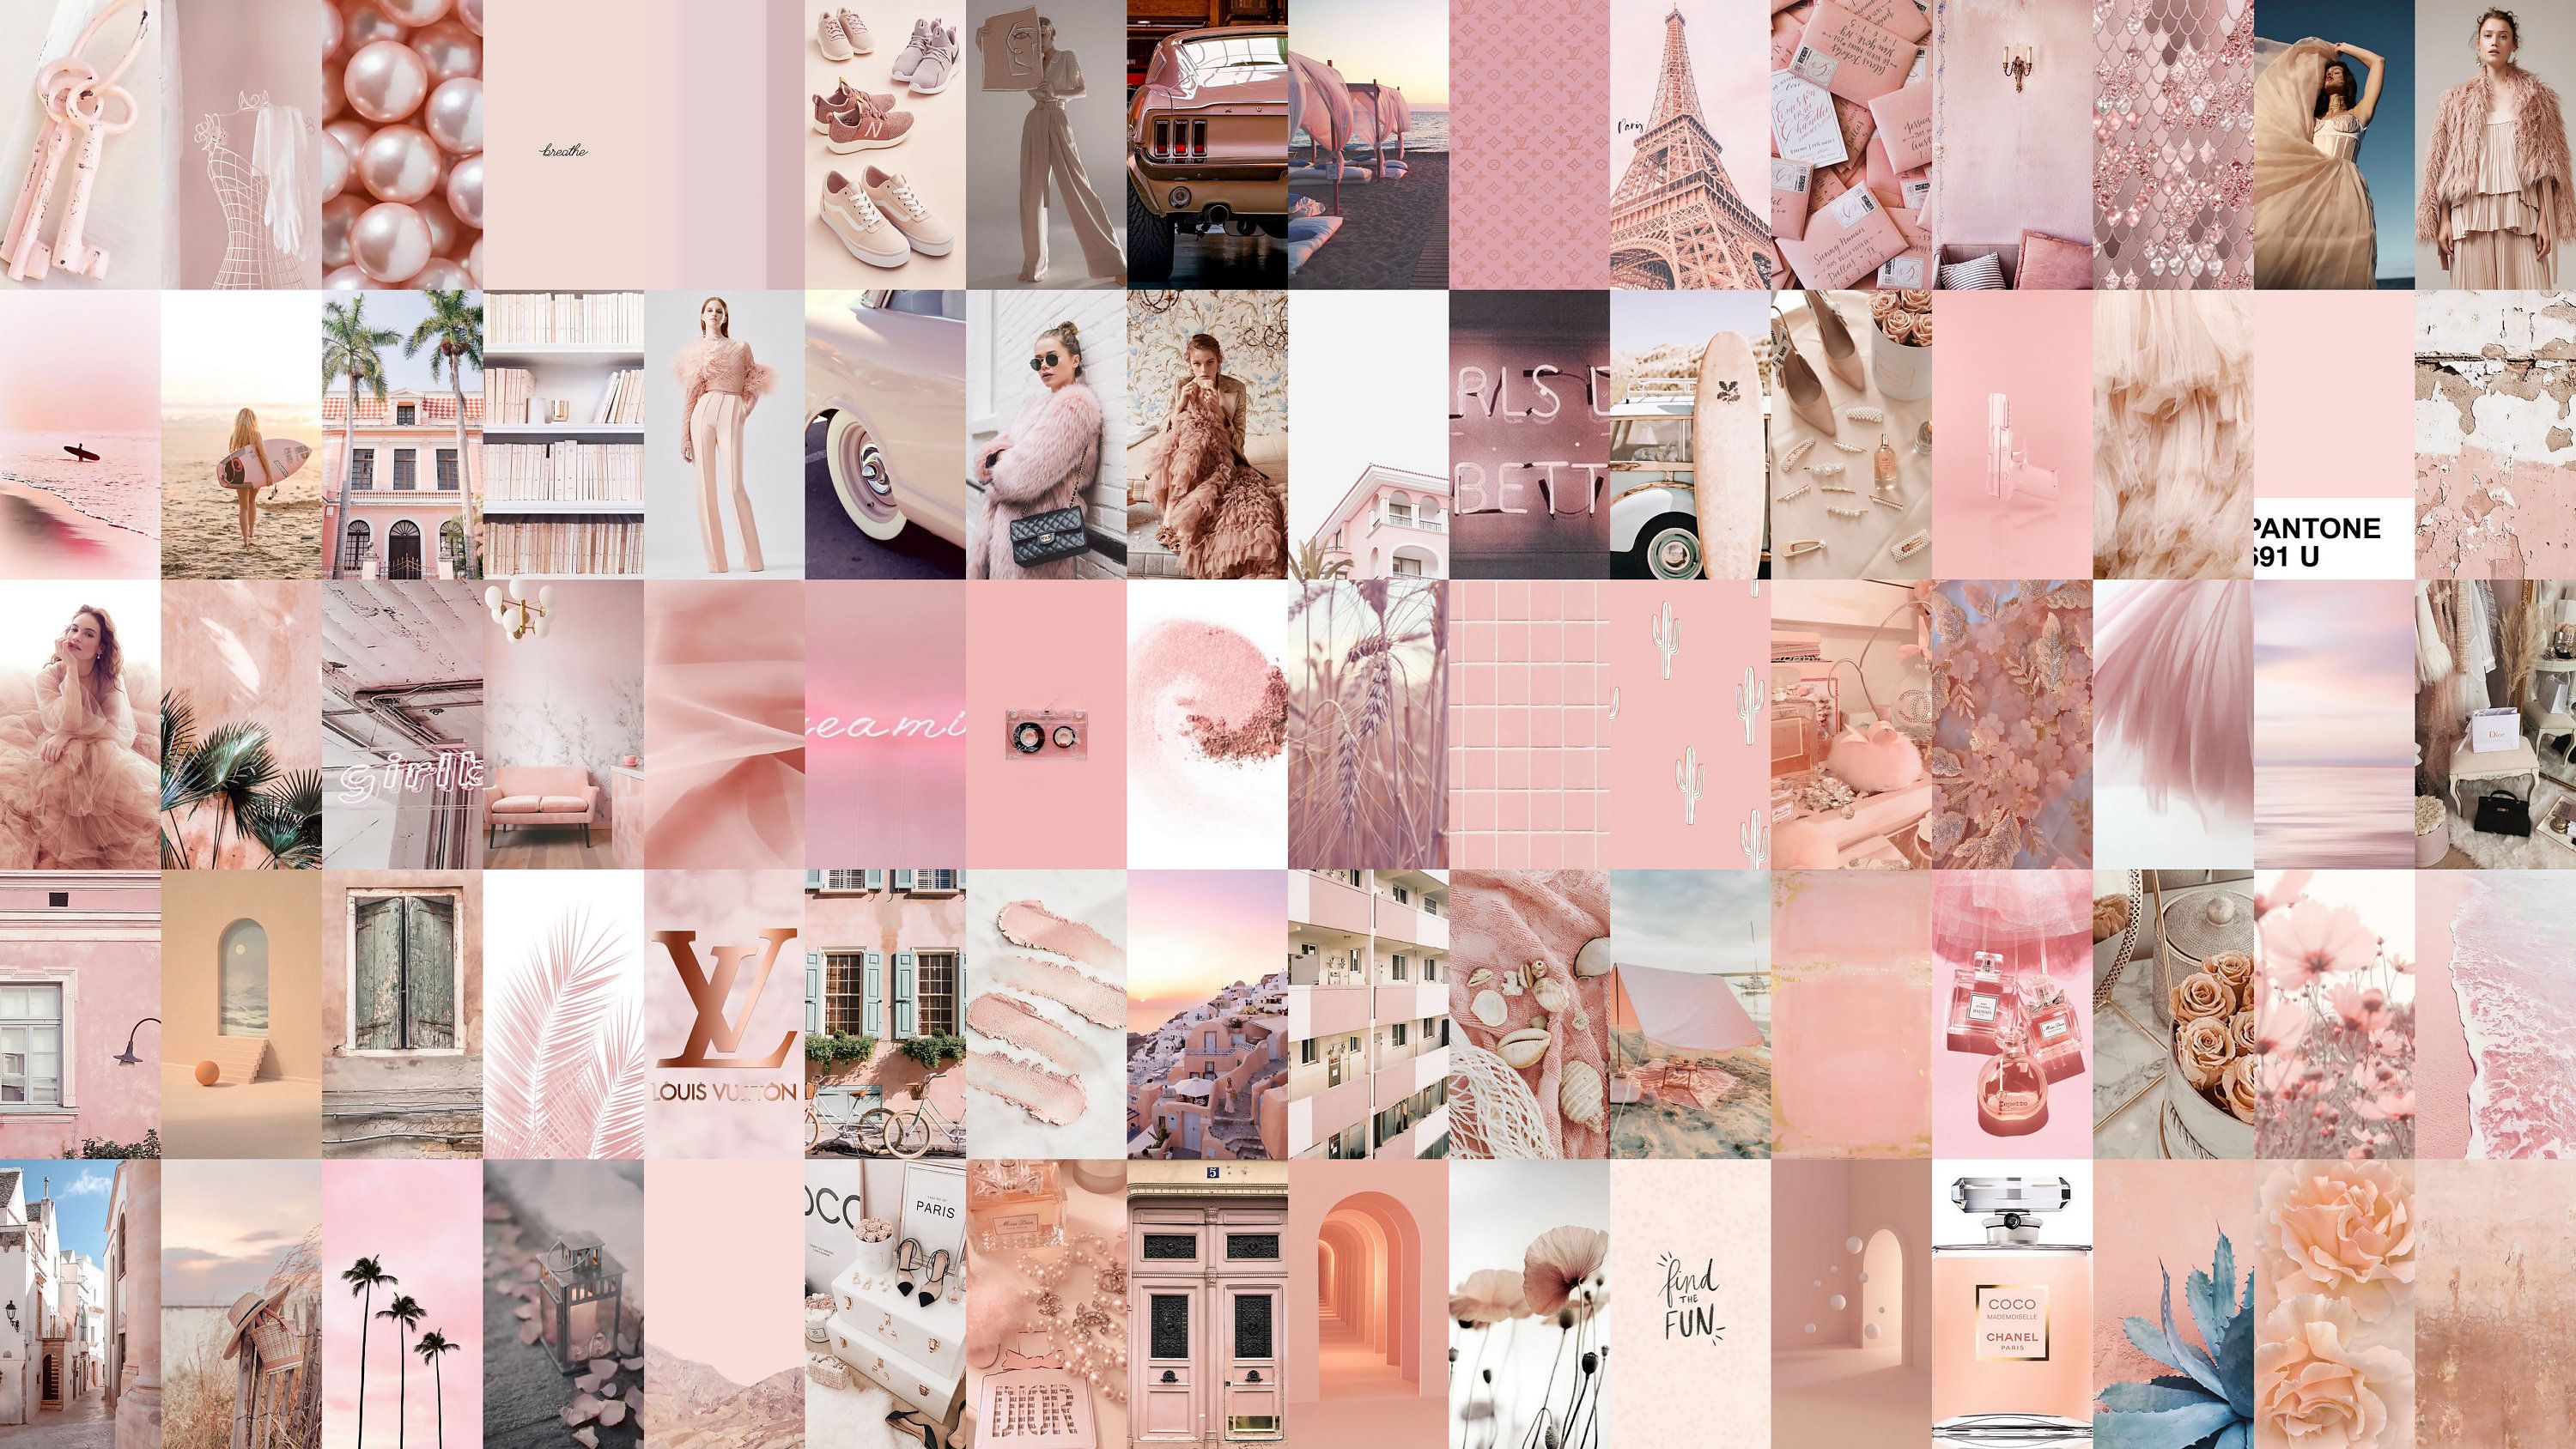 A collage of photos in a pink aesthetic - Blush